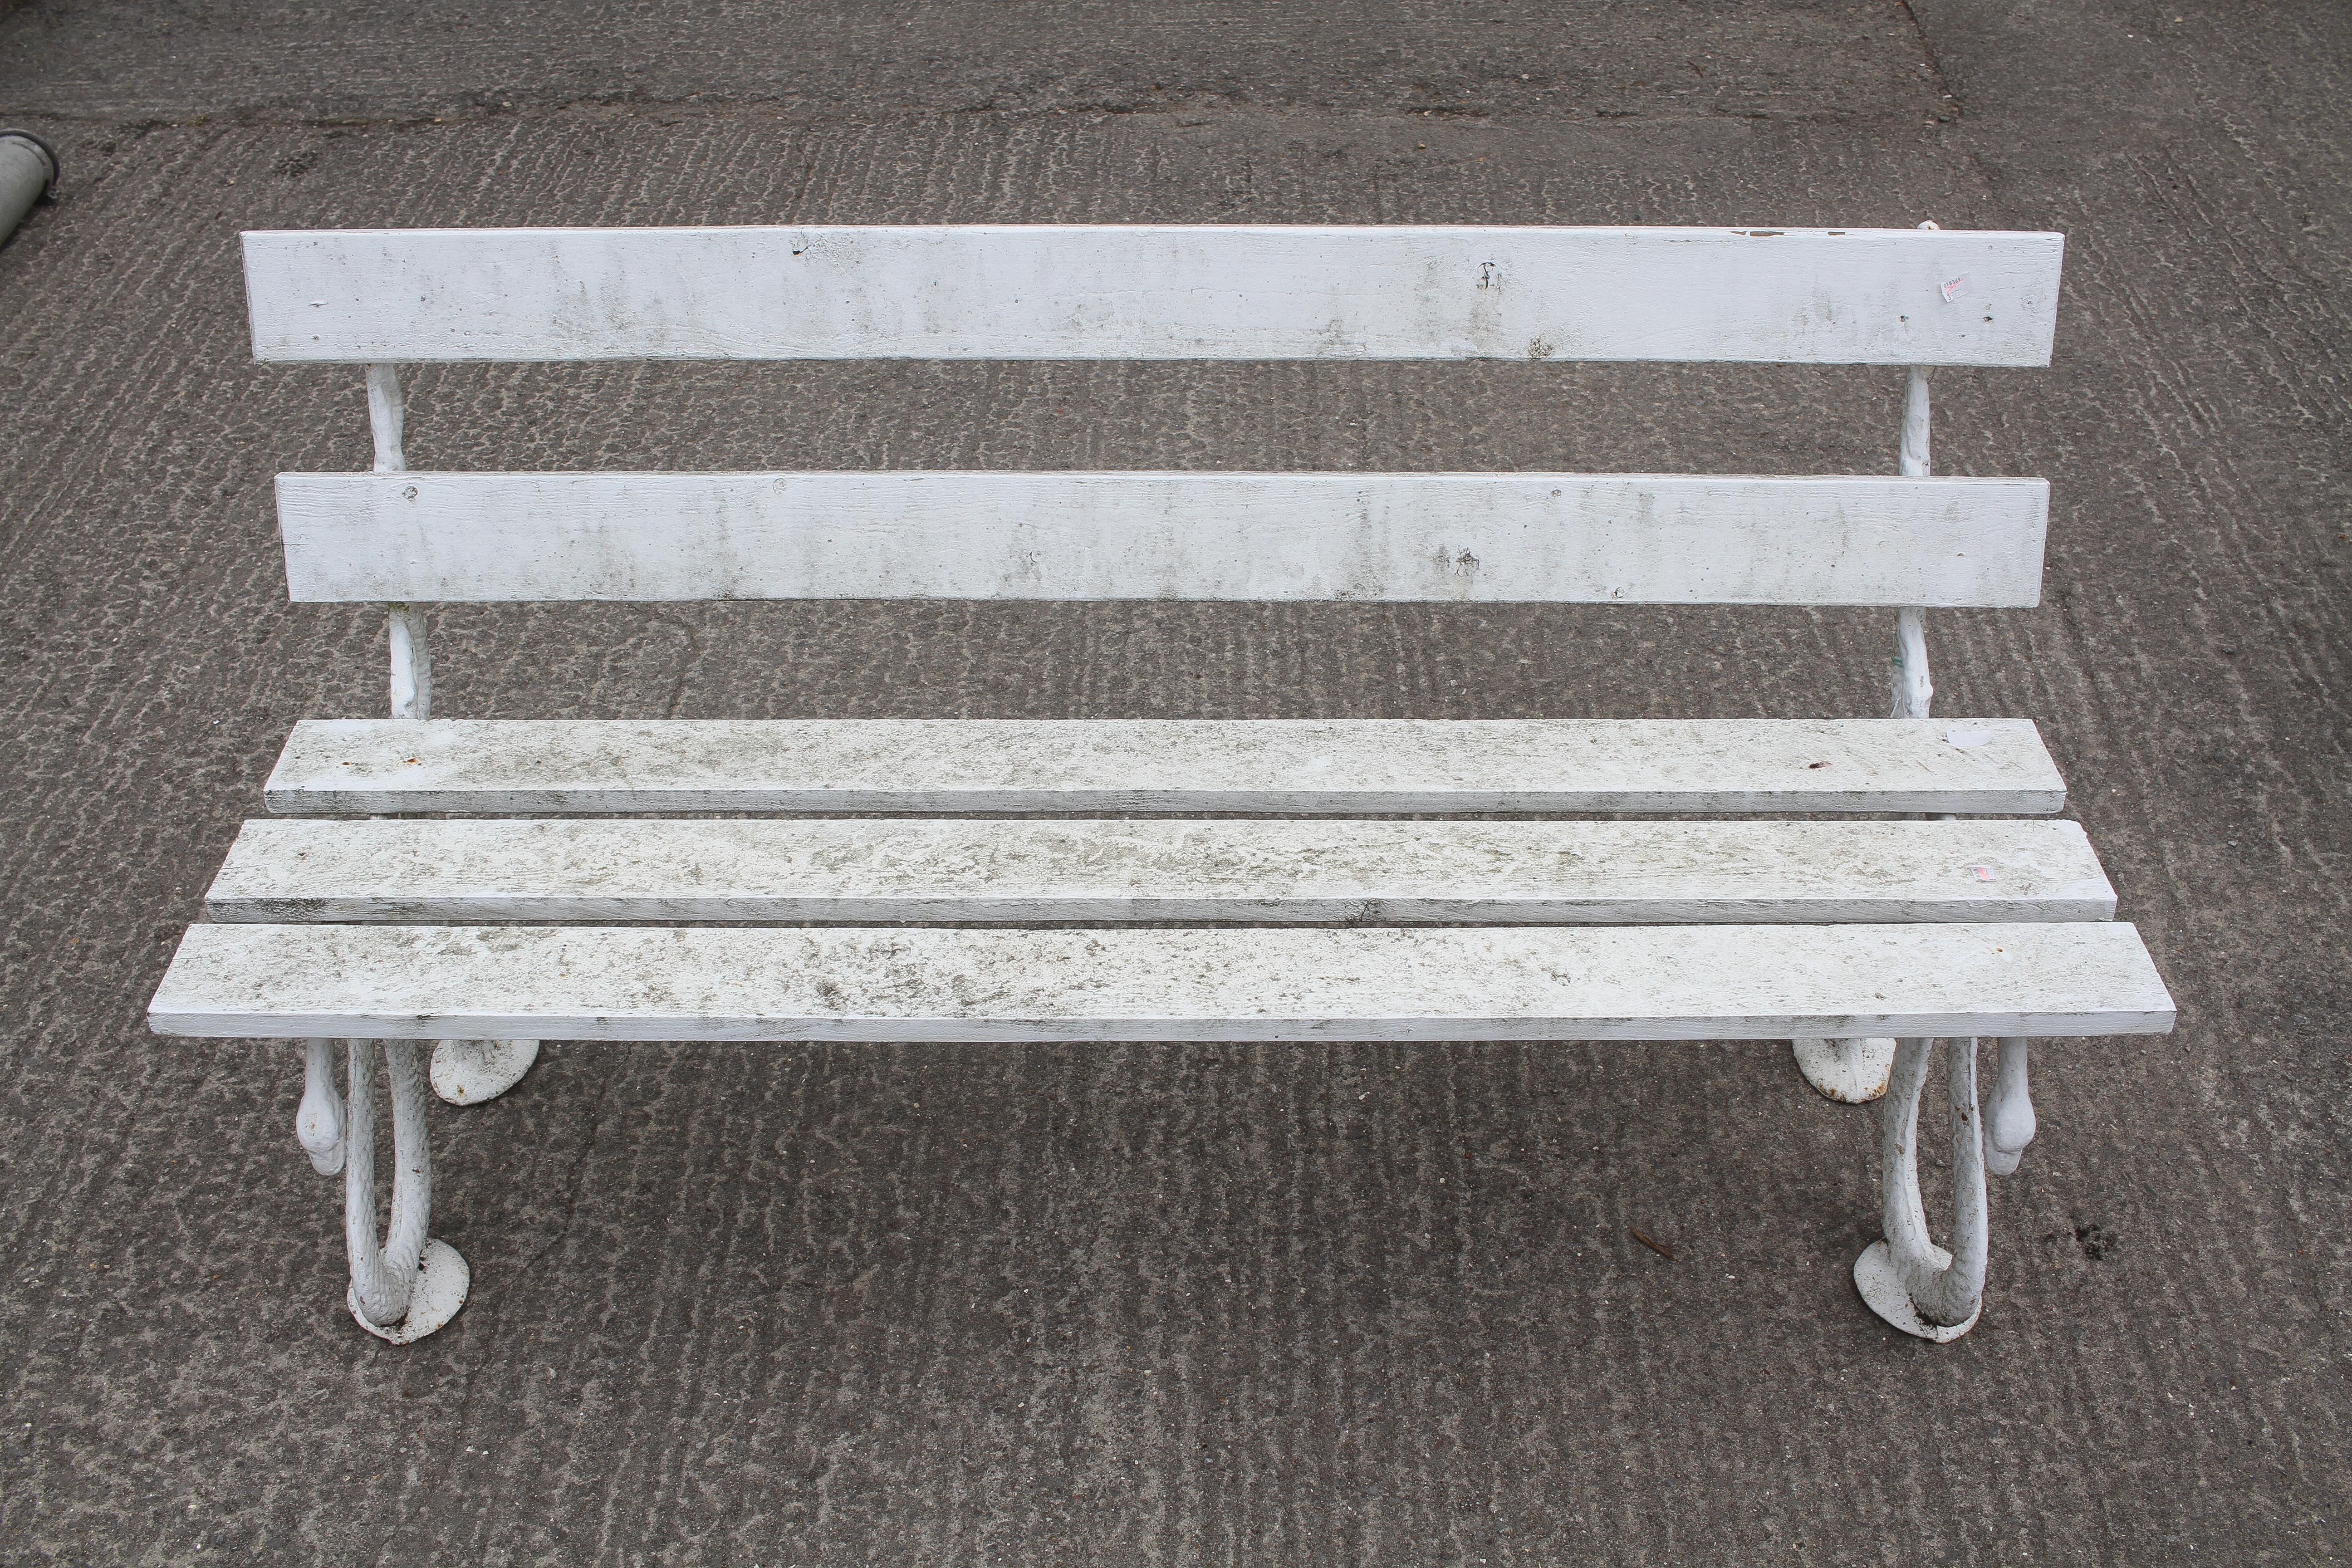 A Coalbrookdale style cast iron and wooden slatted bench, with snake and branch supports,